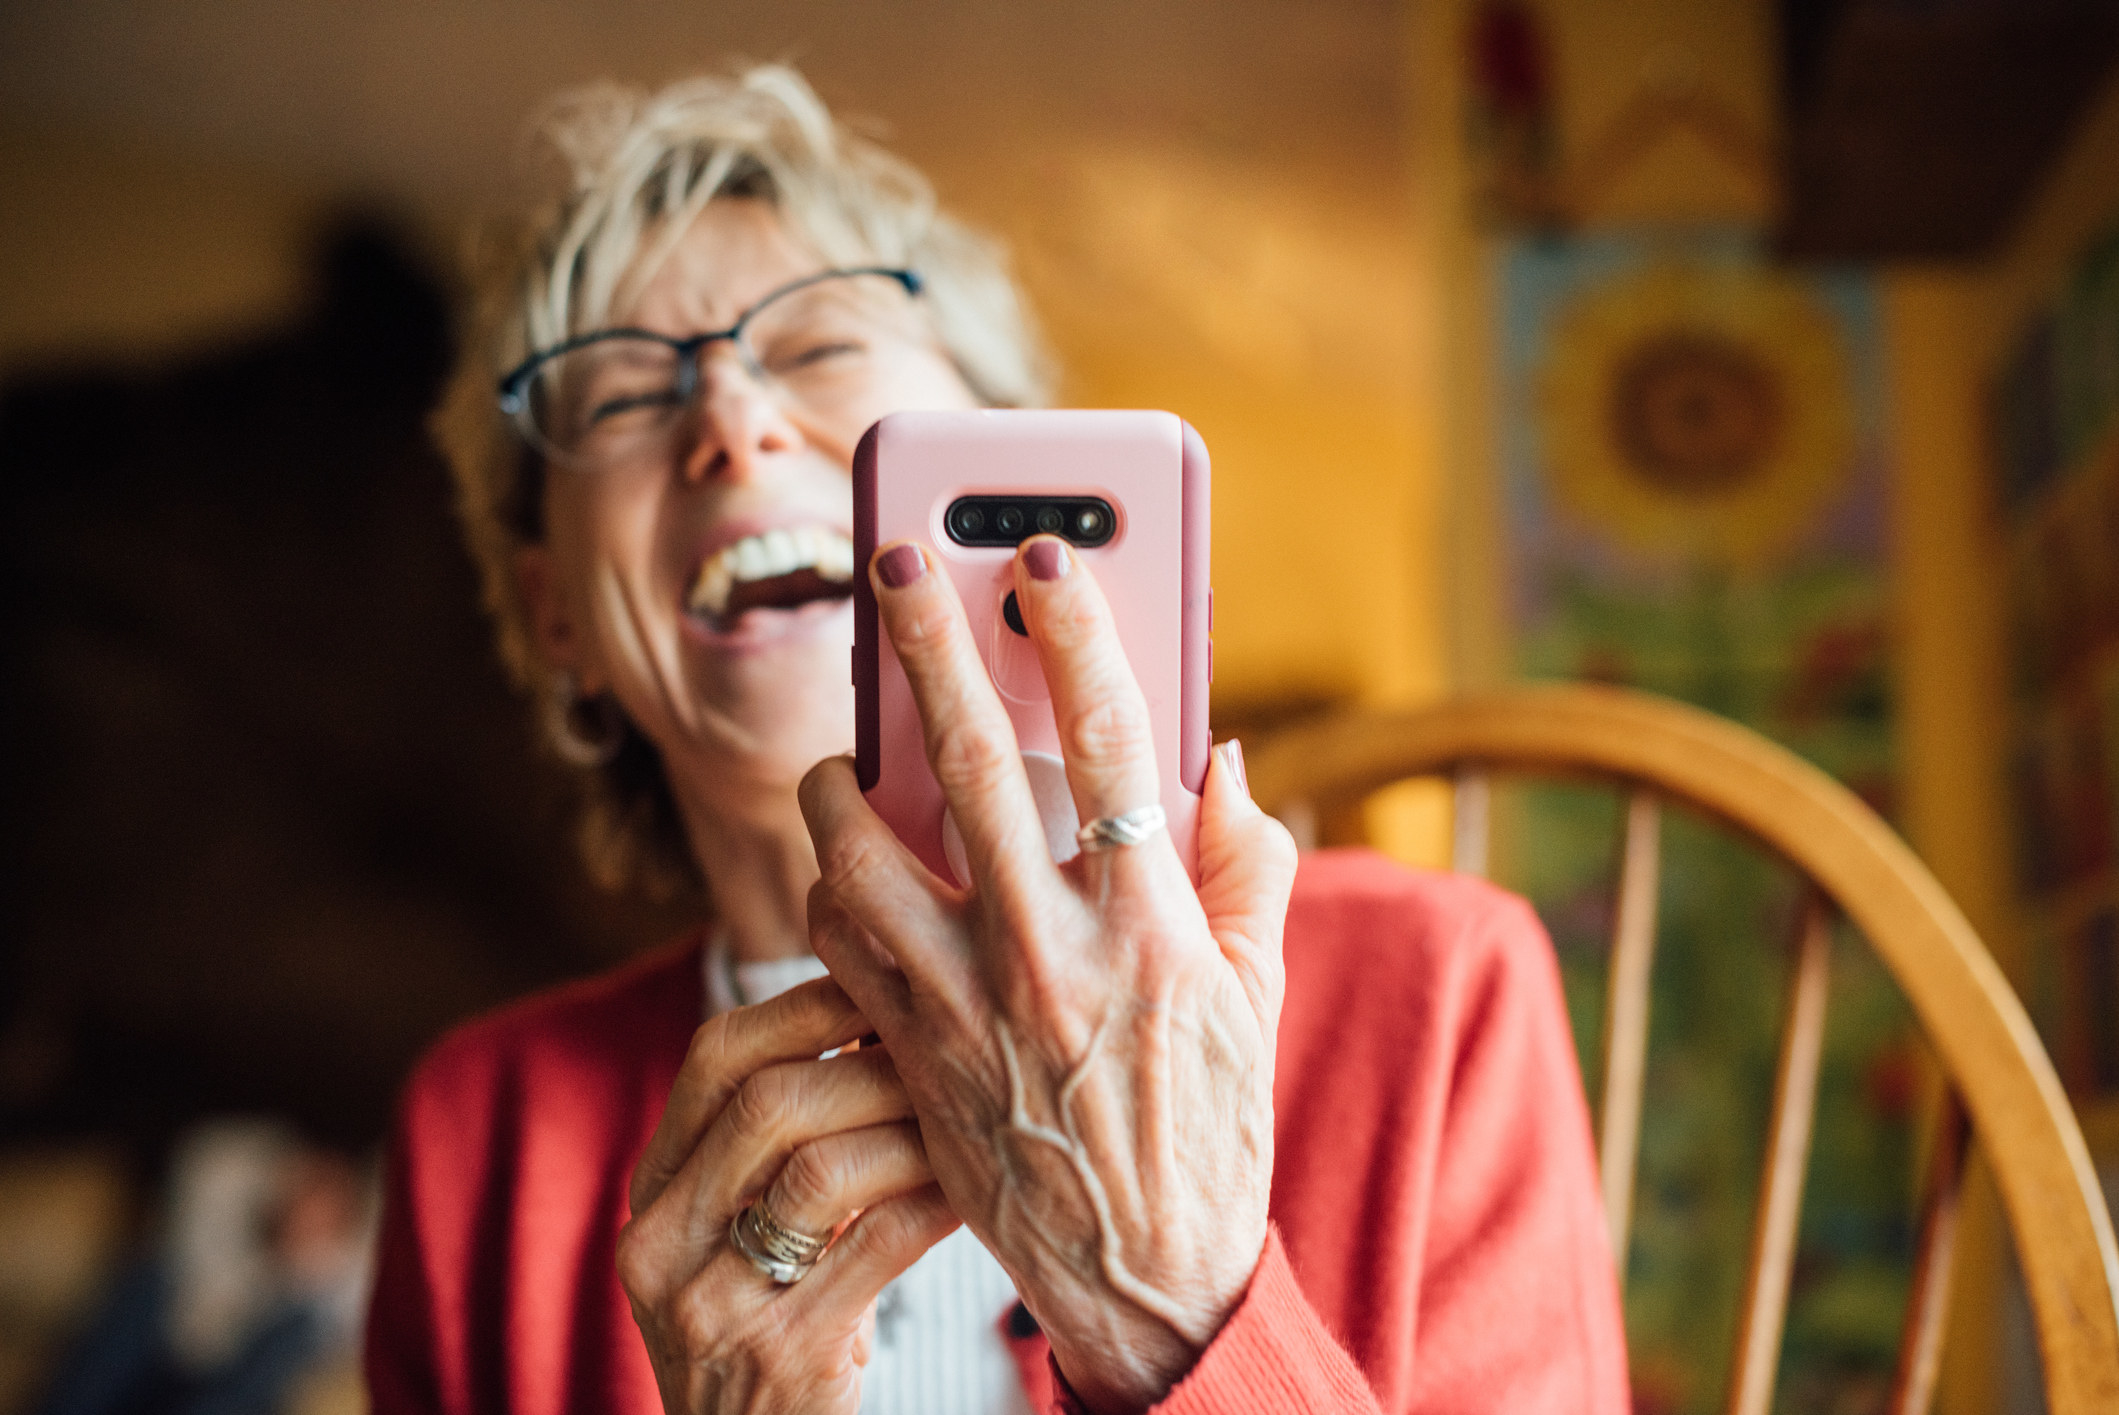 A woman laughing at her cellphone.